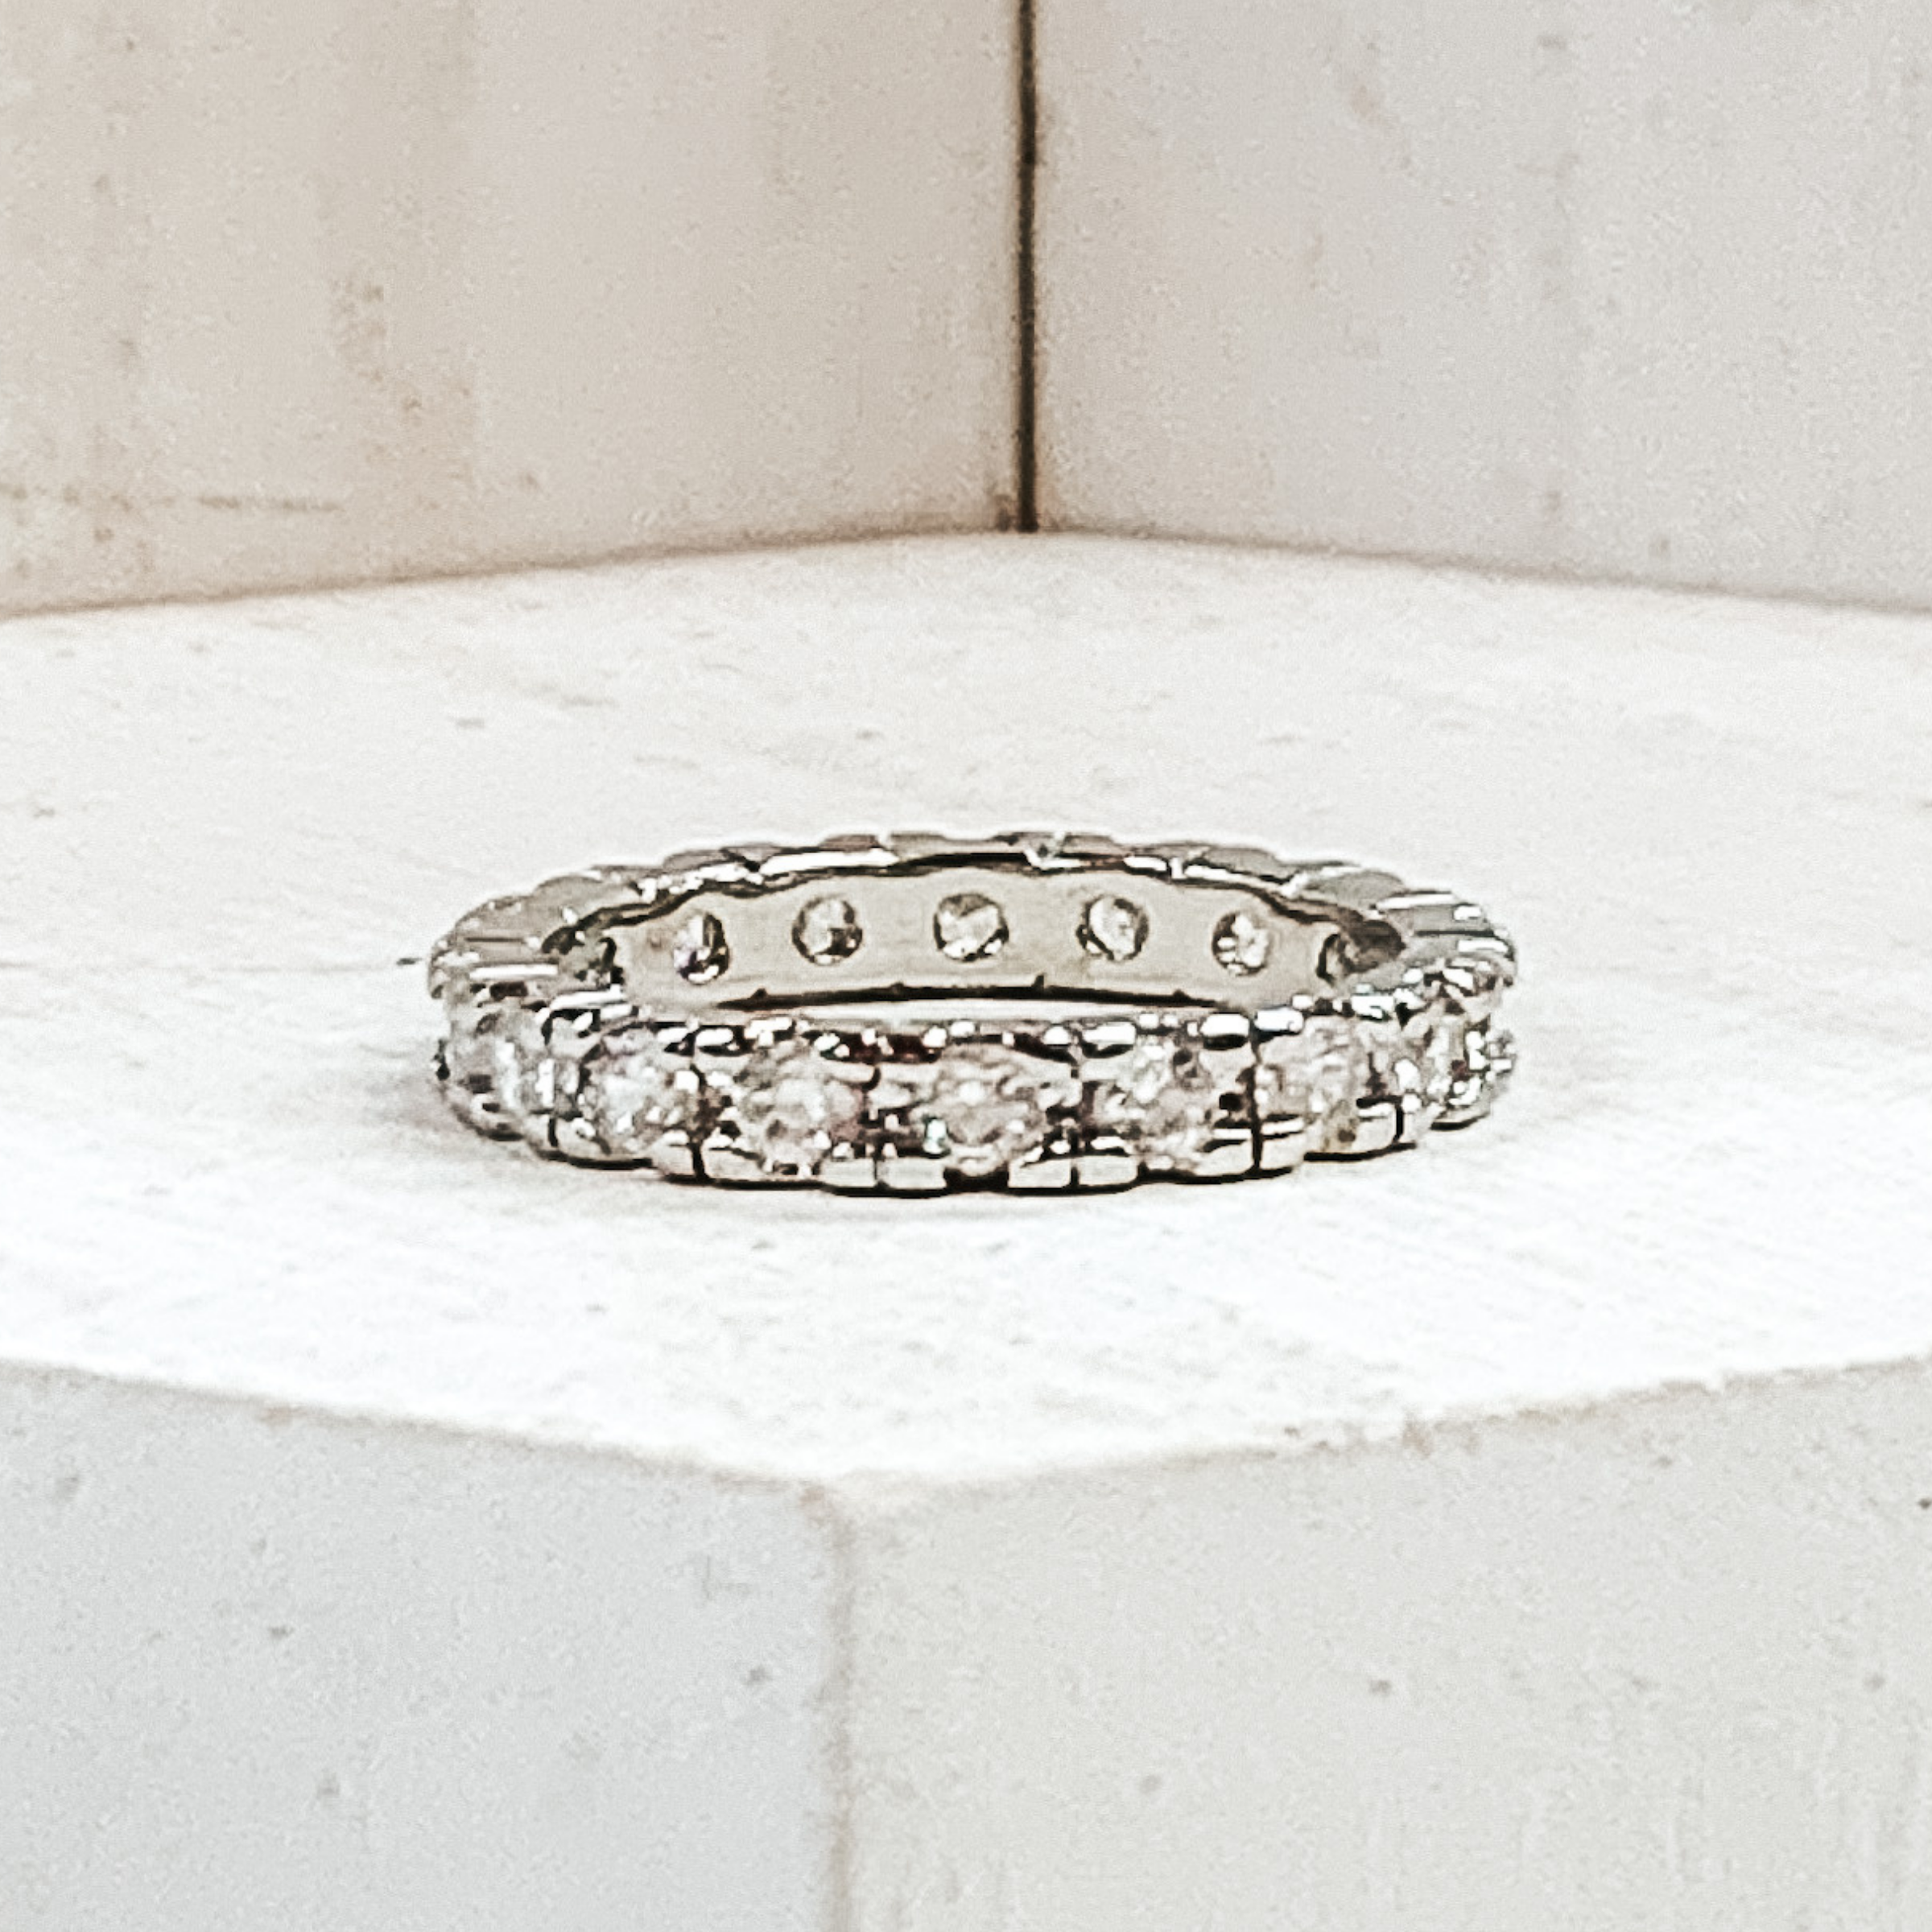 Silver ring with center clear crystals in each segment. This ring is pictured on a white background.